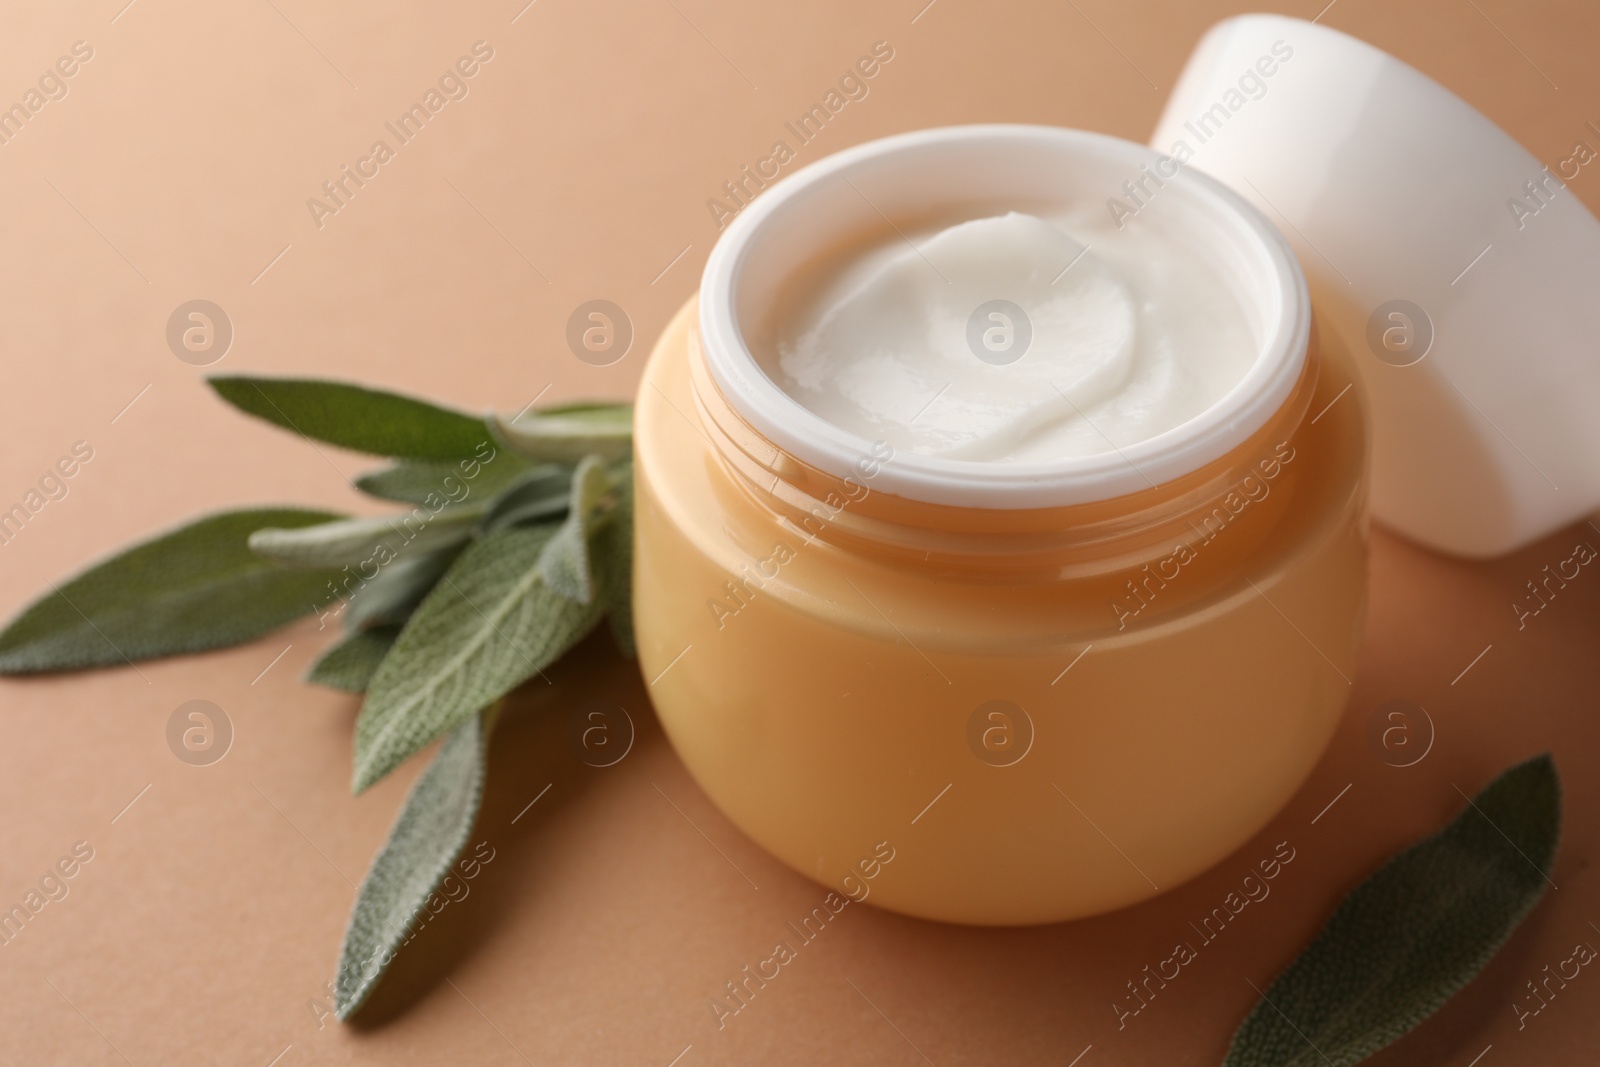 Photo of Jar of face cream and sage leaves on beige background